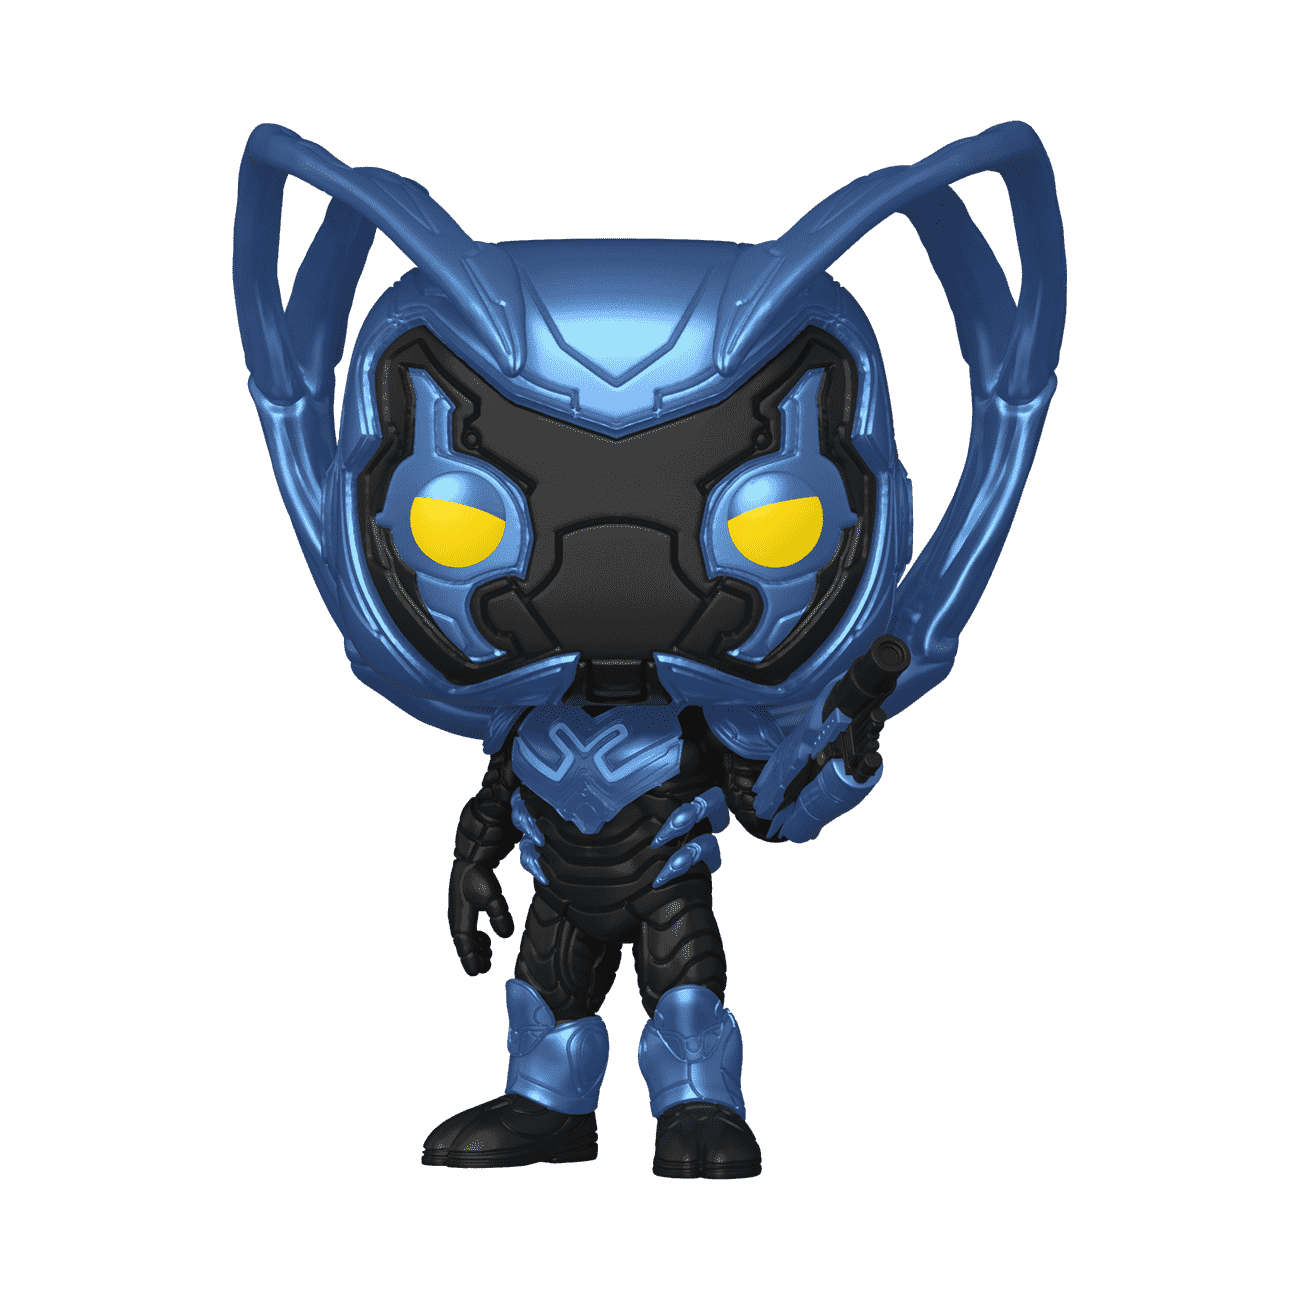 Blue Beetle, Now Showing, Book Tickets